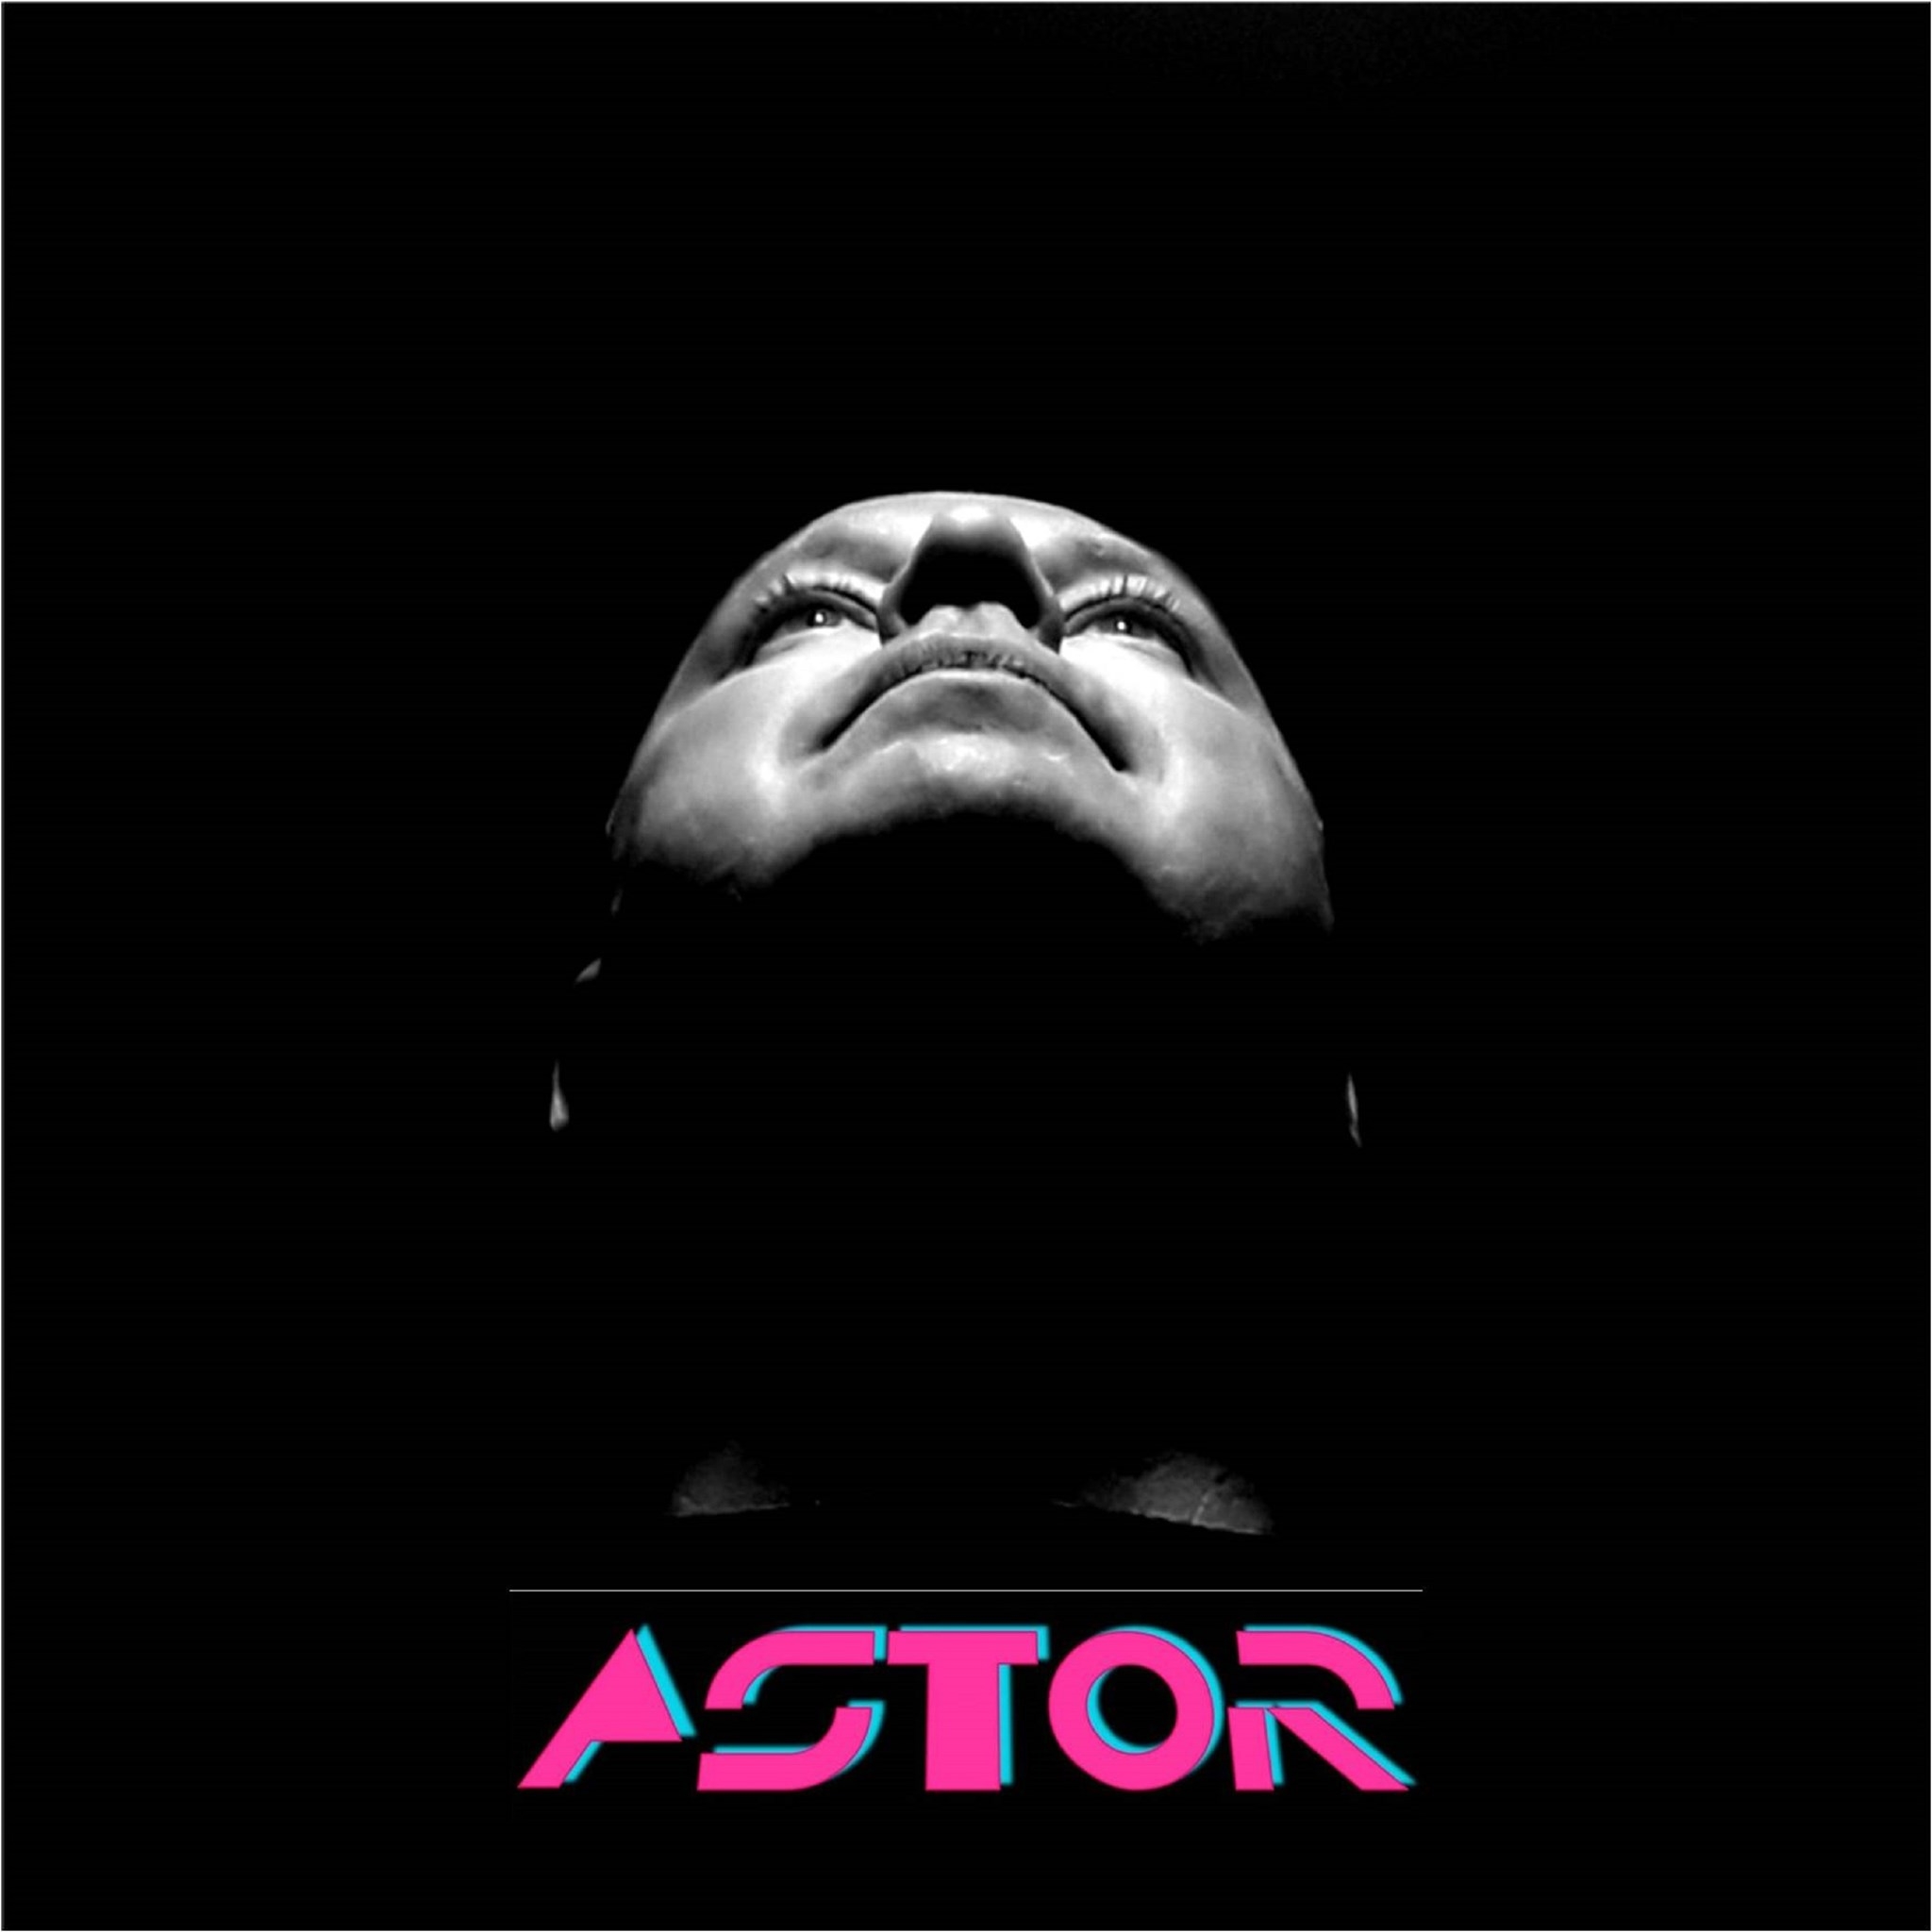 You are currently viewing Astor: Wlad Zechner (U Just) estreia projeto synthwave